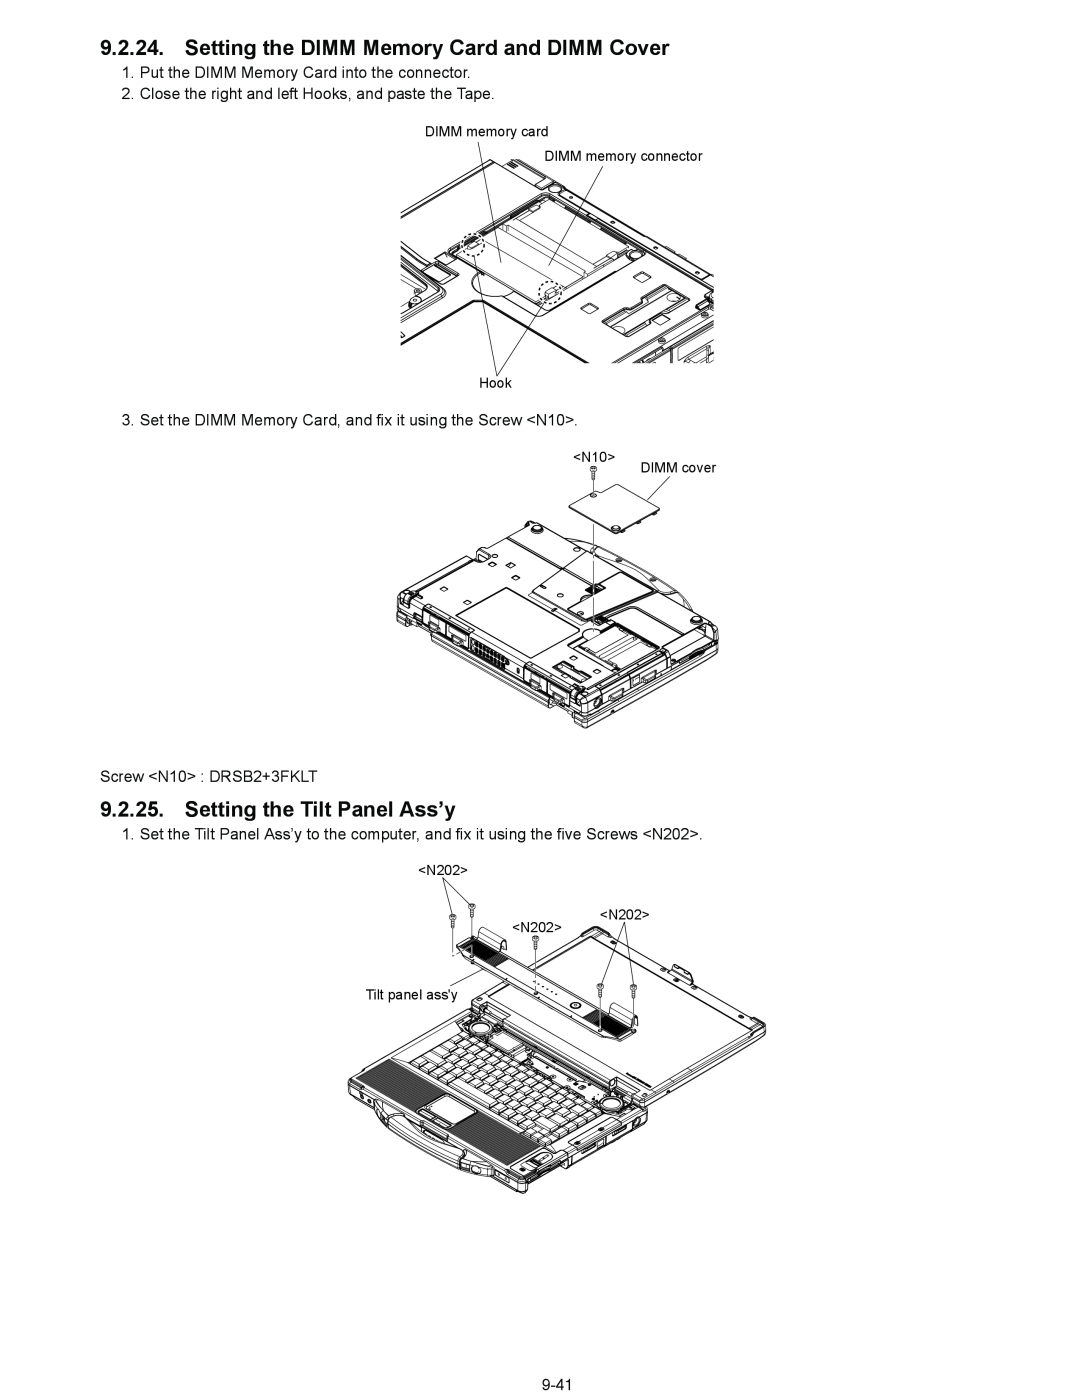 Panasonic CF-52EKM 1 D 2 M service manual Setting the DIMM Memory Card and DIMM Cover, Setting the Tilt Panel Ass’y 